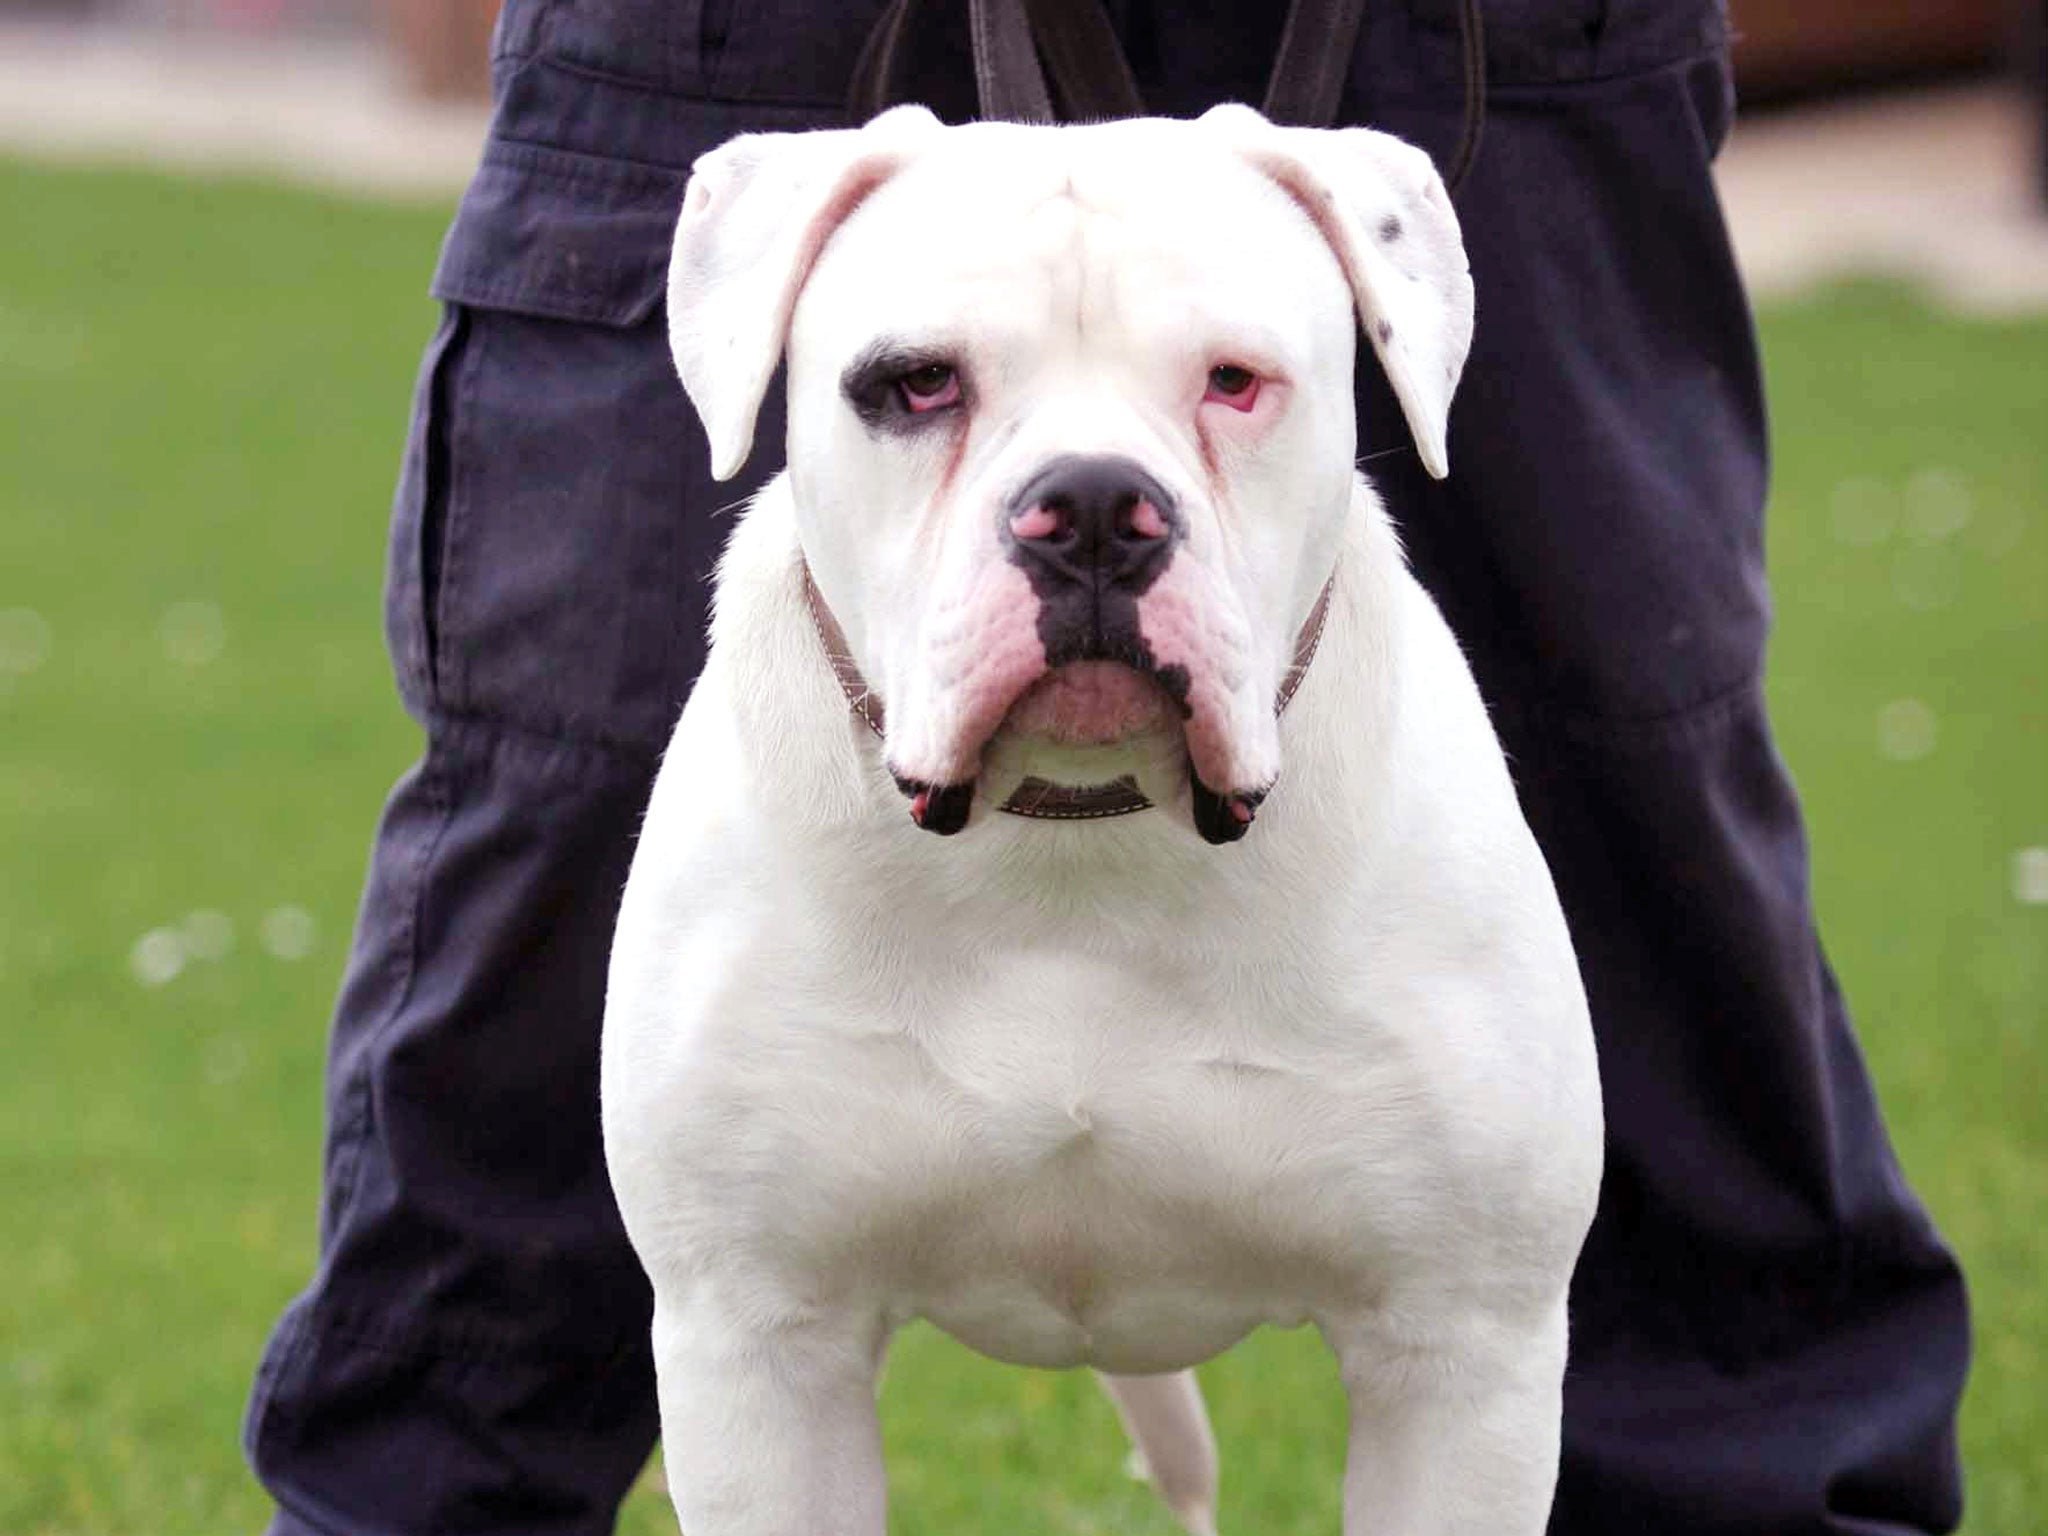 American bulldogs mauled owner and 'almost severed his arm